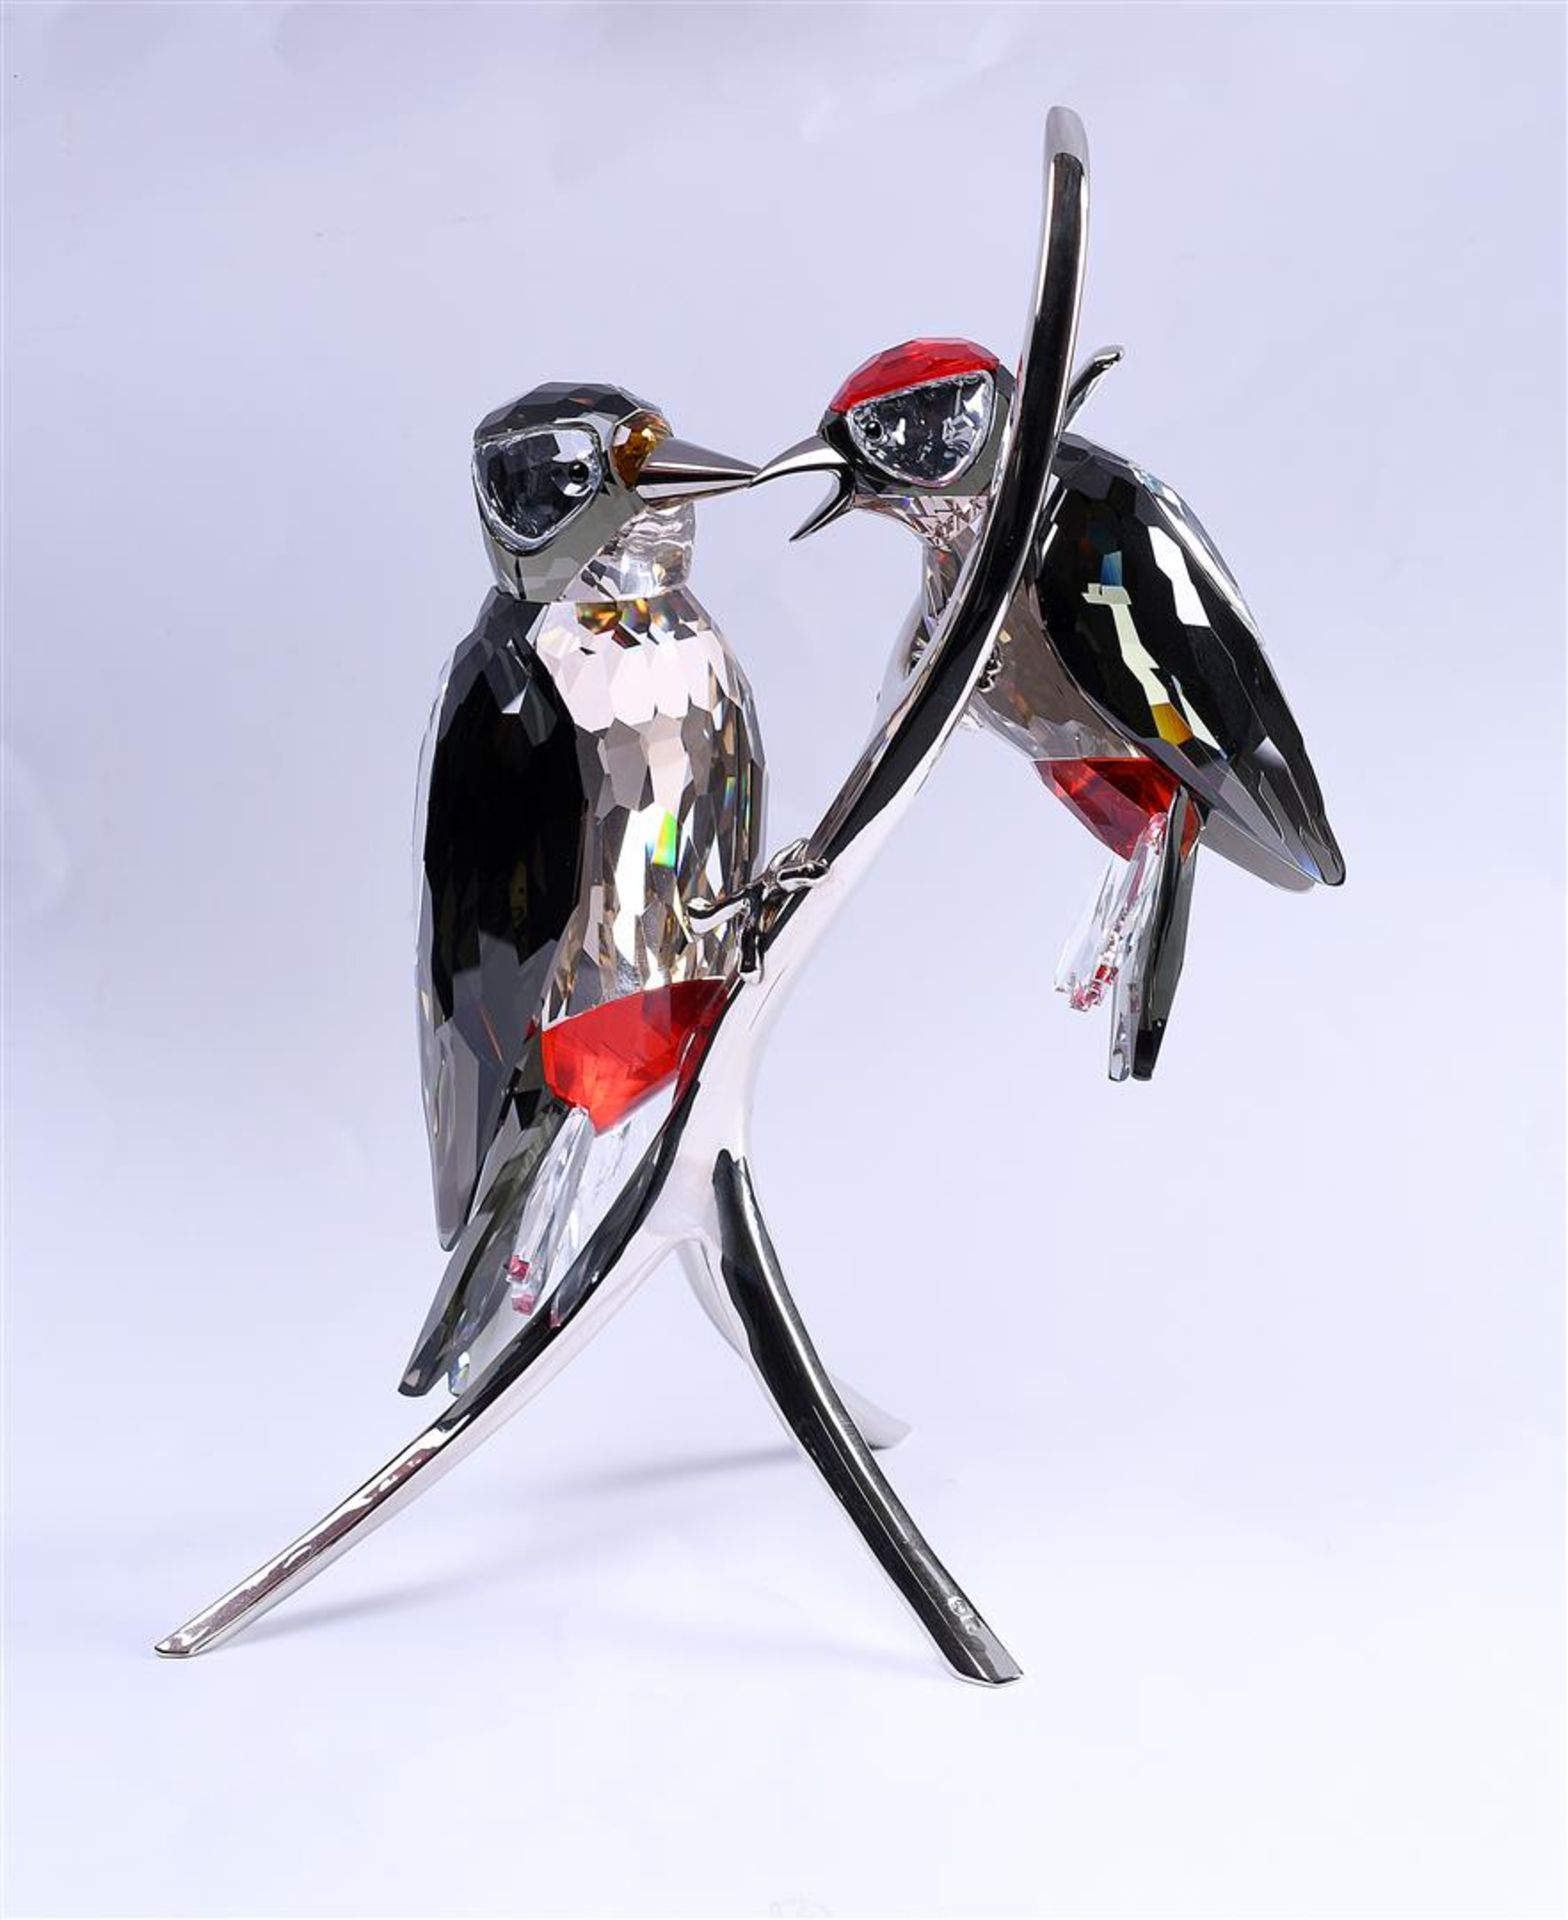 Swarovski, woodpeckers, Year of issue 2009,957562. Includes original box.
H. 21,9 cm. - Image 4 of 9